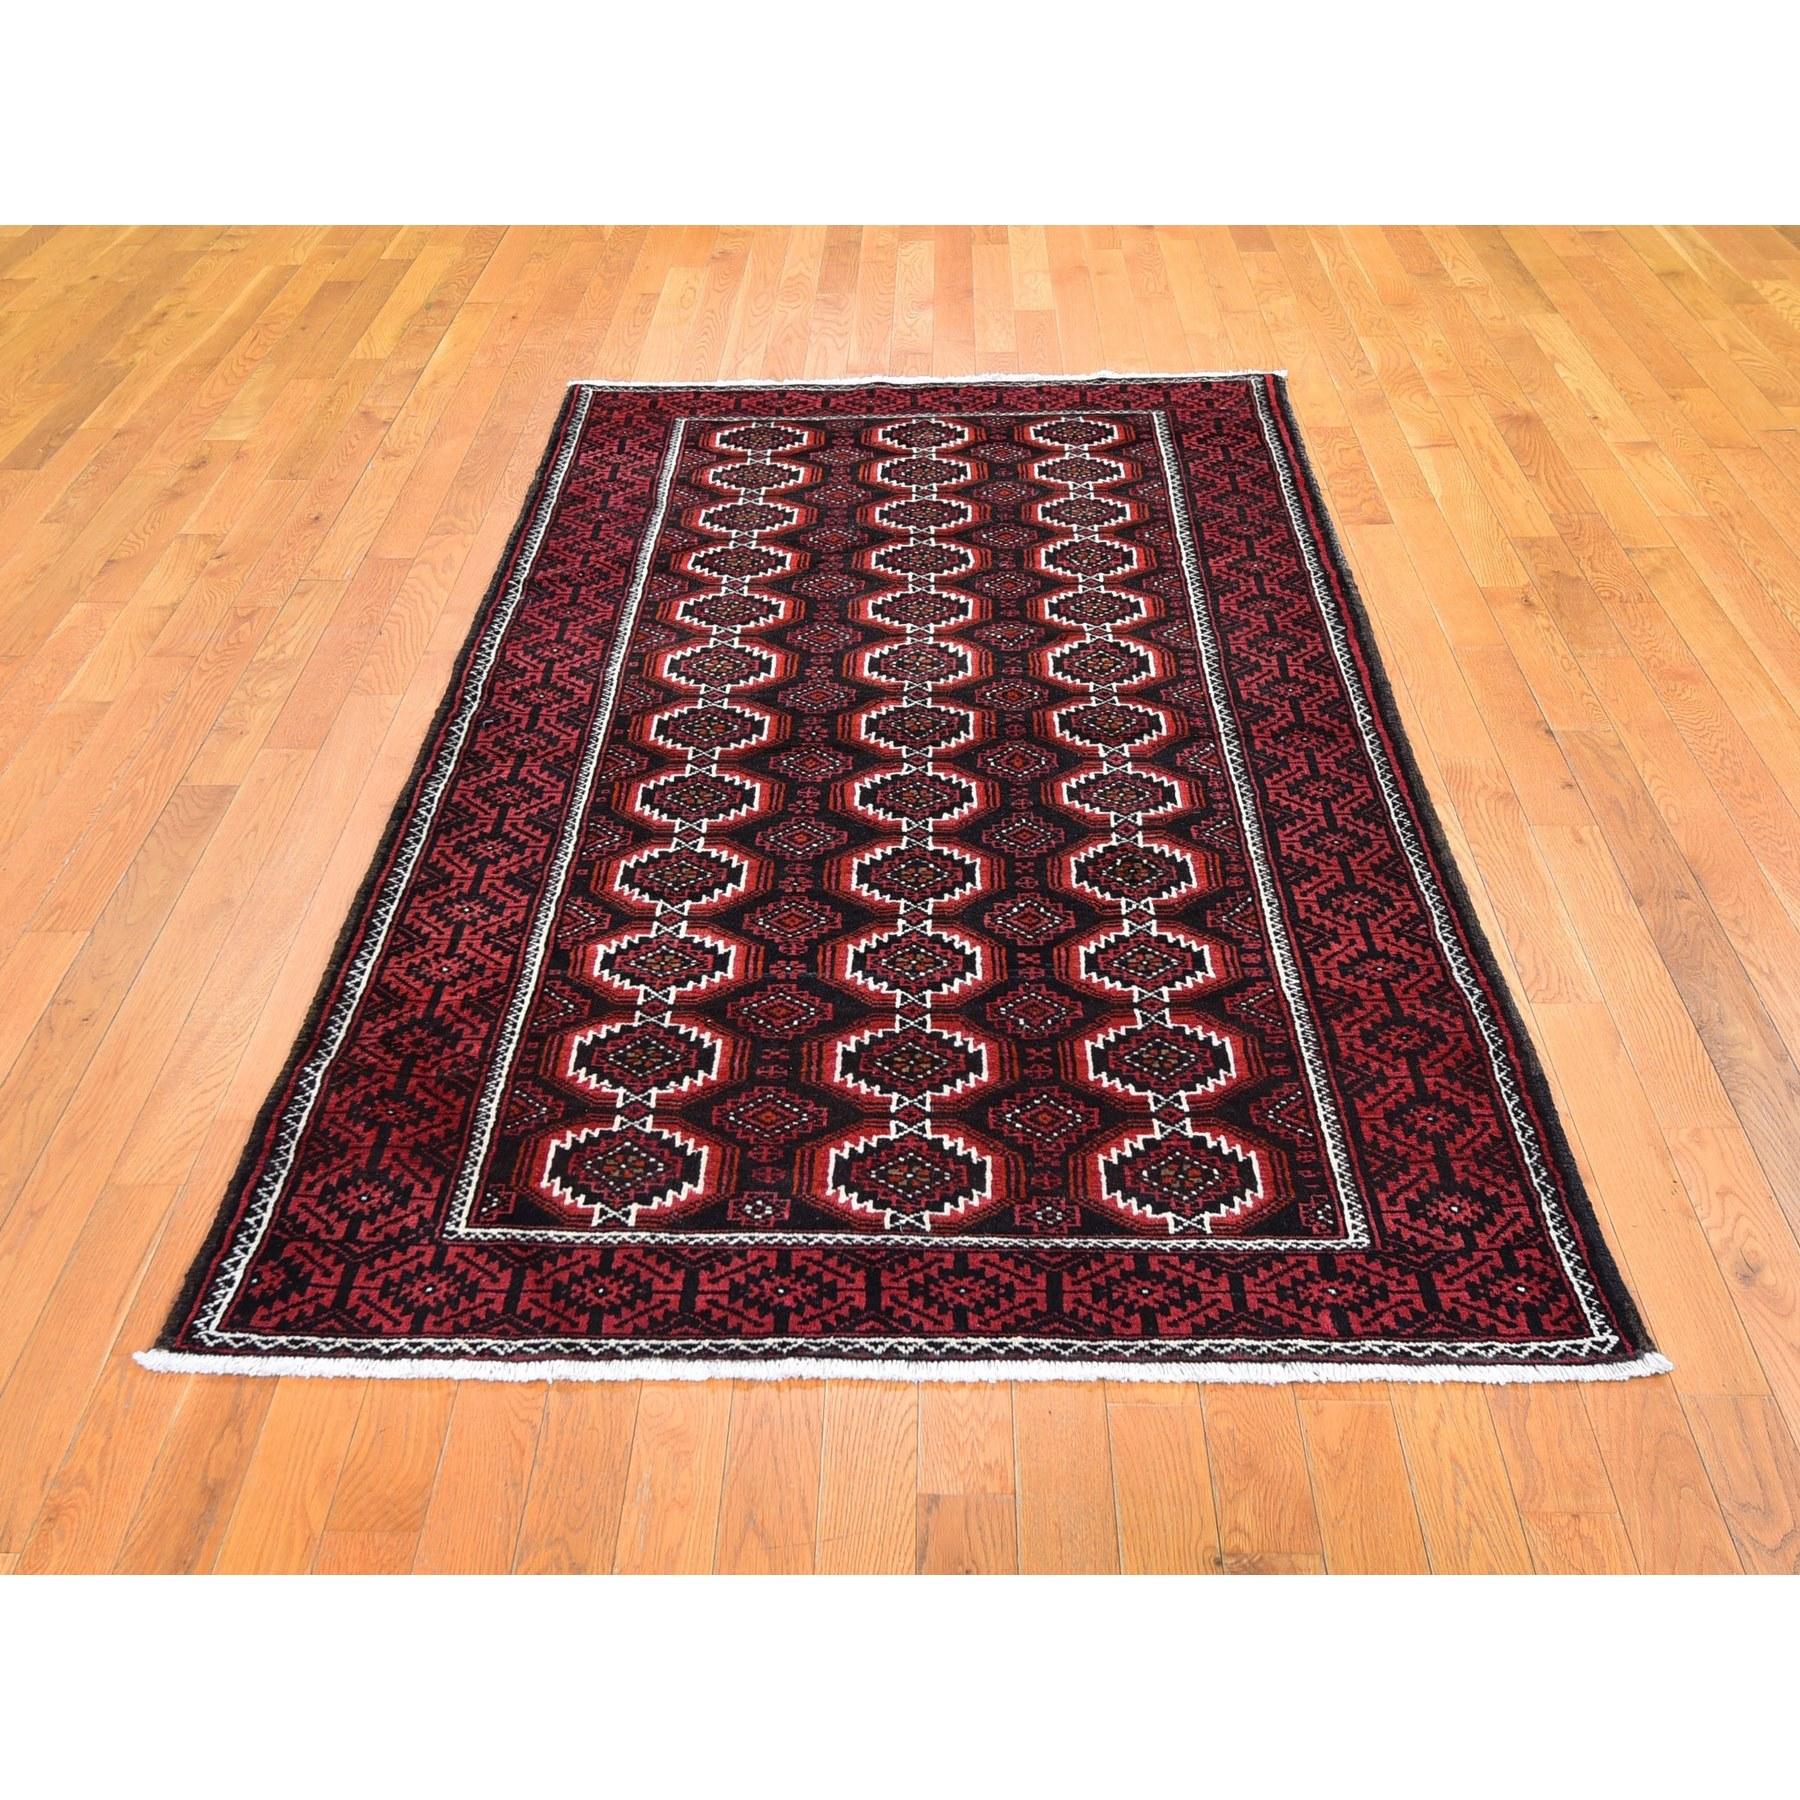 This fabulous hand-knotted carpet has been created and designed for extra strength and durability. This rug has been handcrafted for weeks in the traditional method that is used to make
Exact Rug Size in Feet and Inches : 4'4